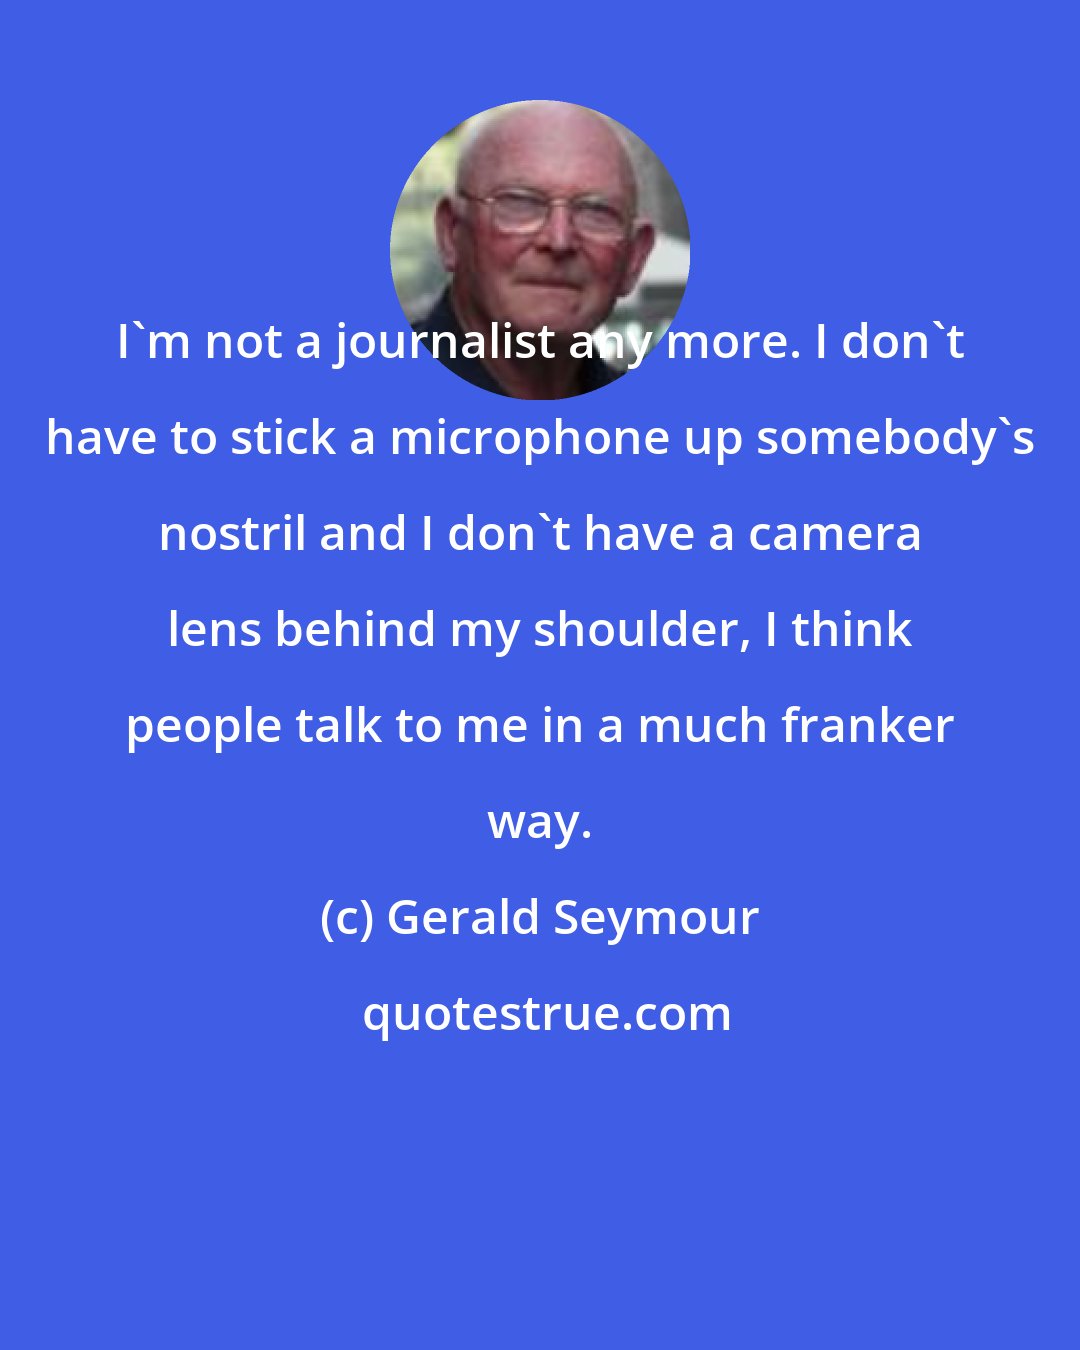 Gerald Seymour: I'm not a journalist any more. I don't have to stick a microphone up somebody's nostril and I don't have a camera lens behind my shoulder, I think people talk to me in a much franker way.